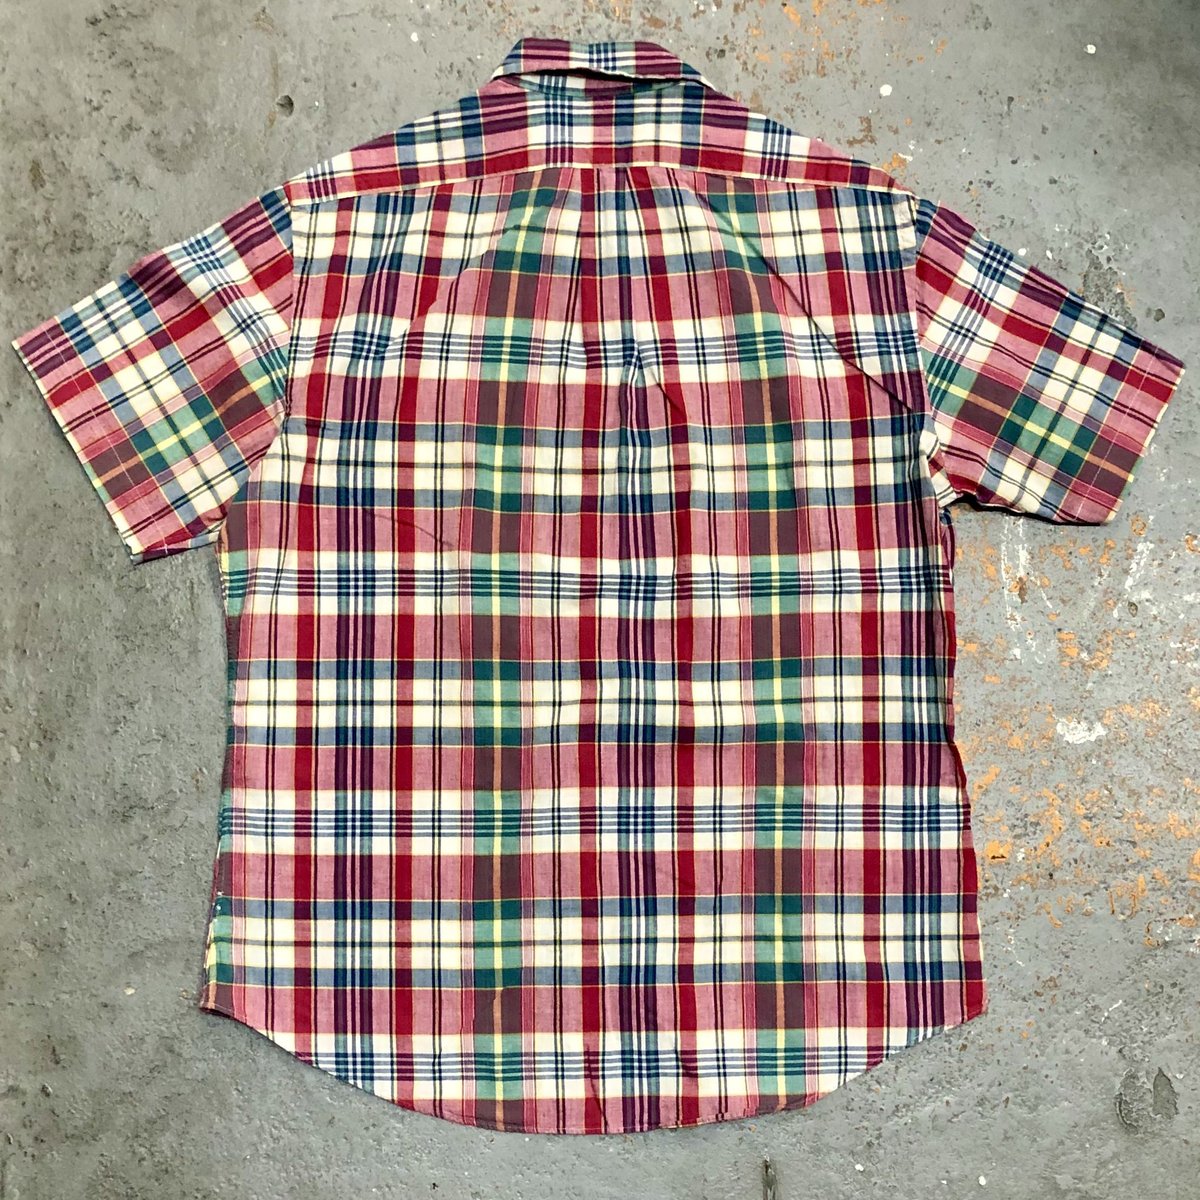 Polo Ralph Lauren Short Sleeve Indian Madras Check Shirts Size : Large